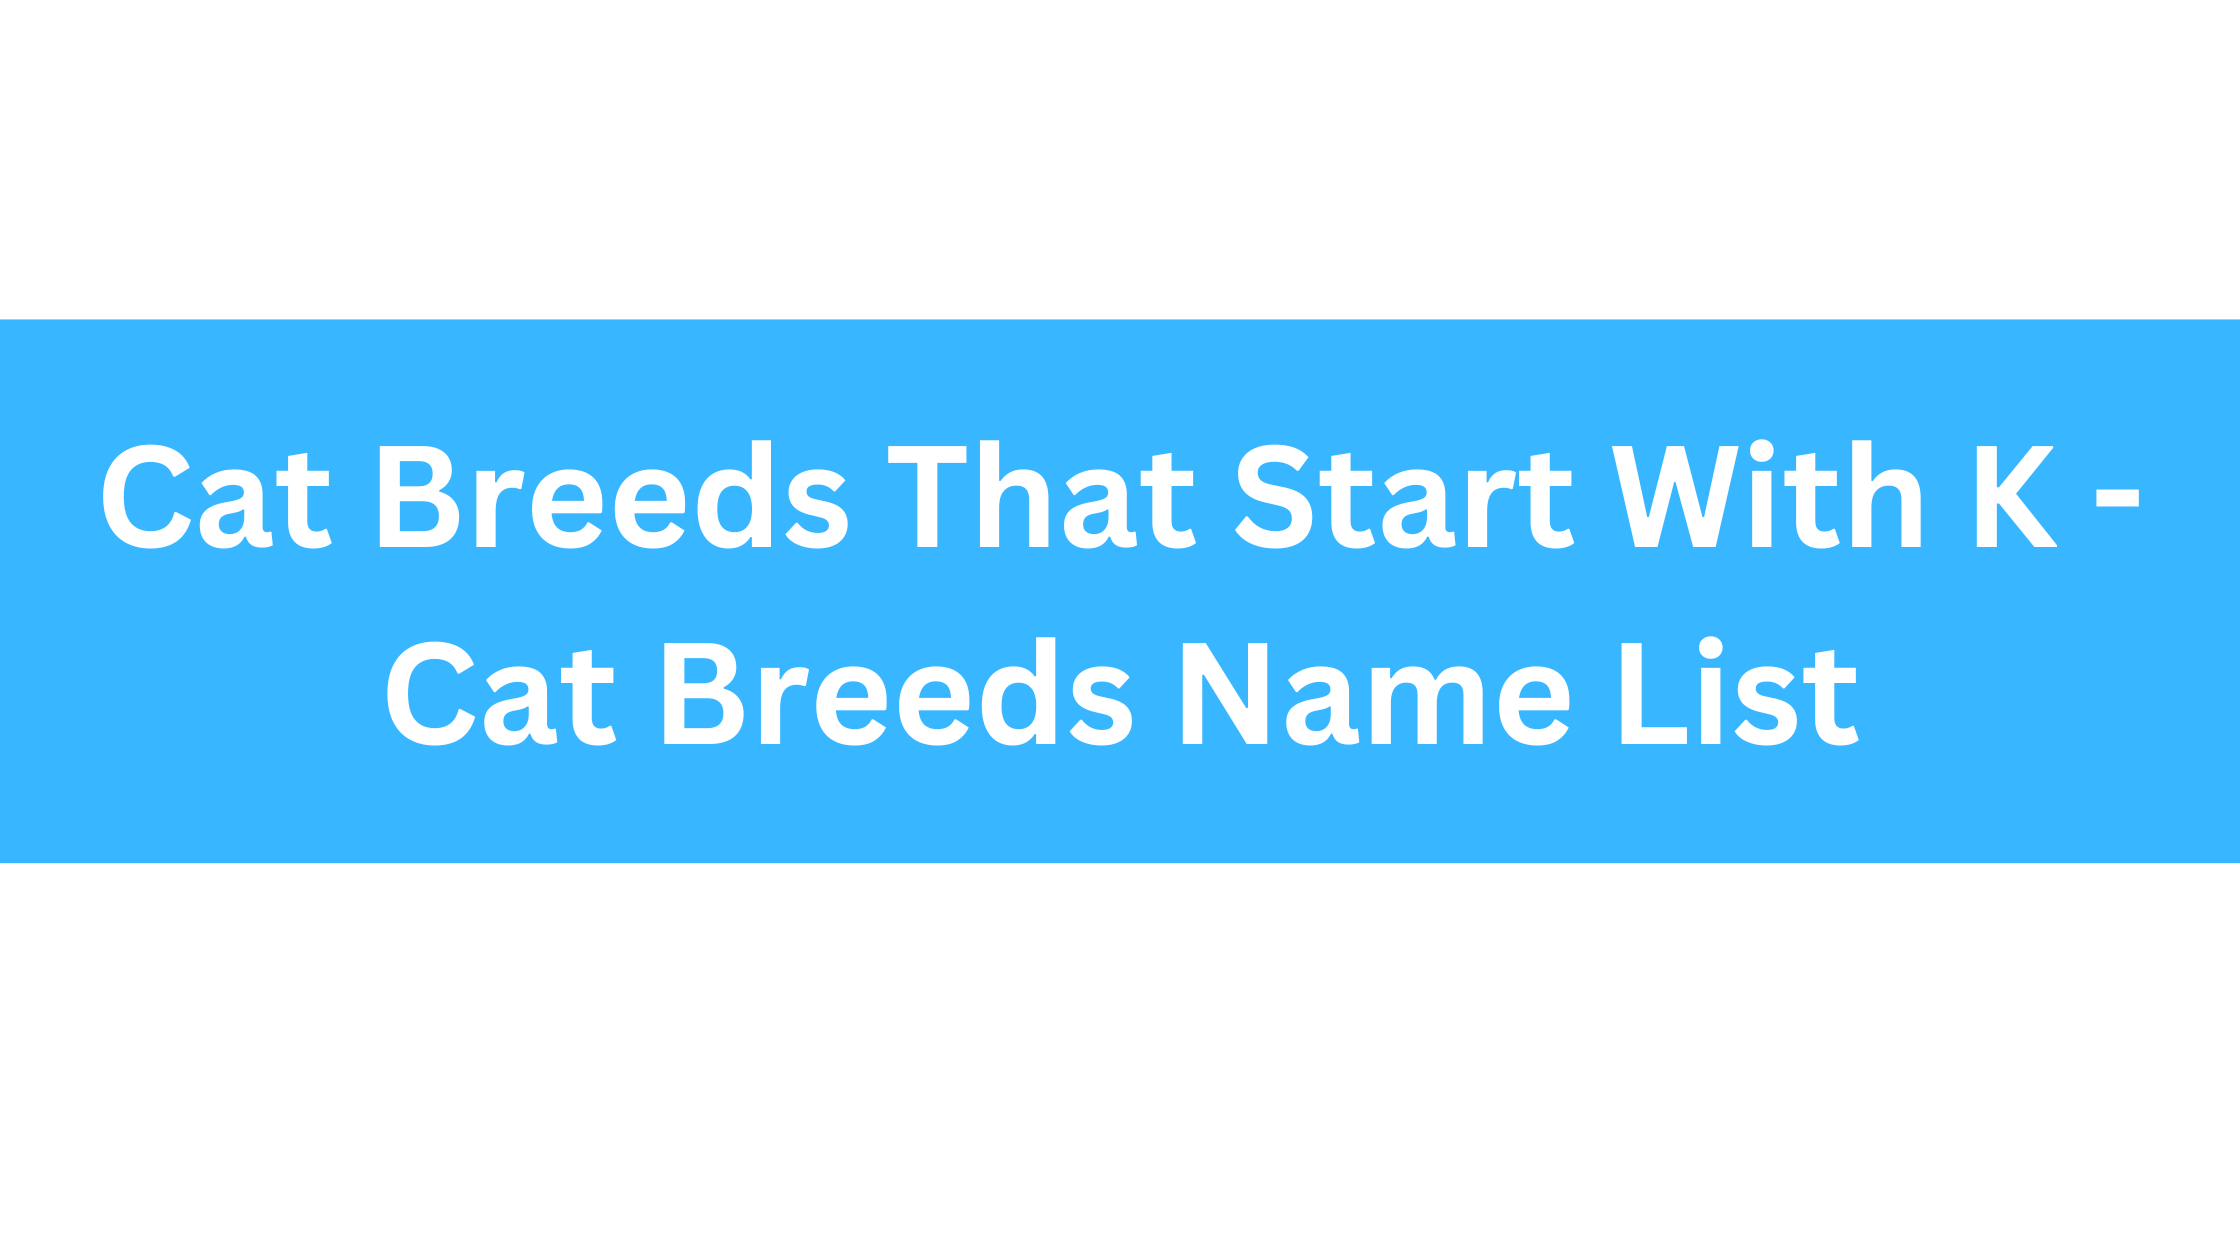 Cat Breeds That Start With K